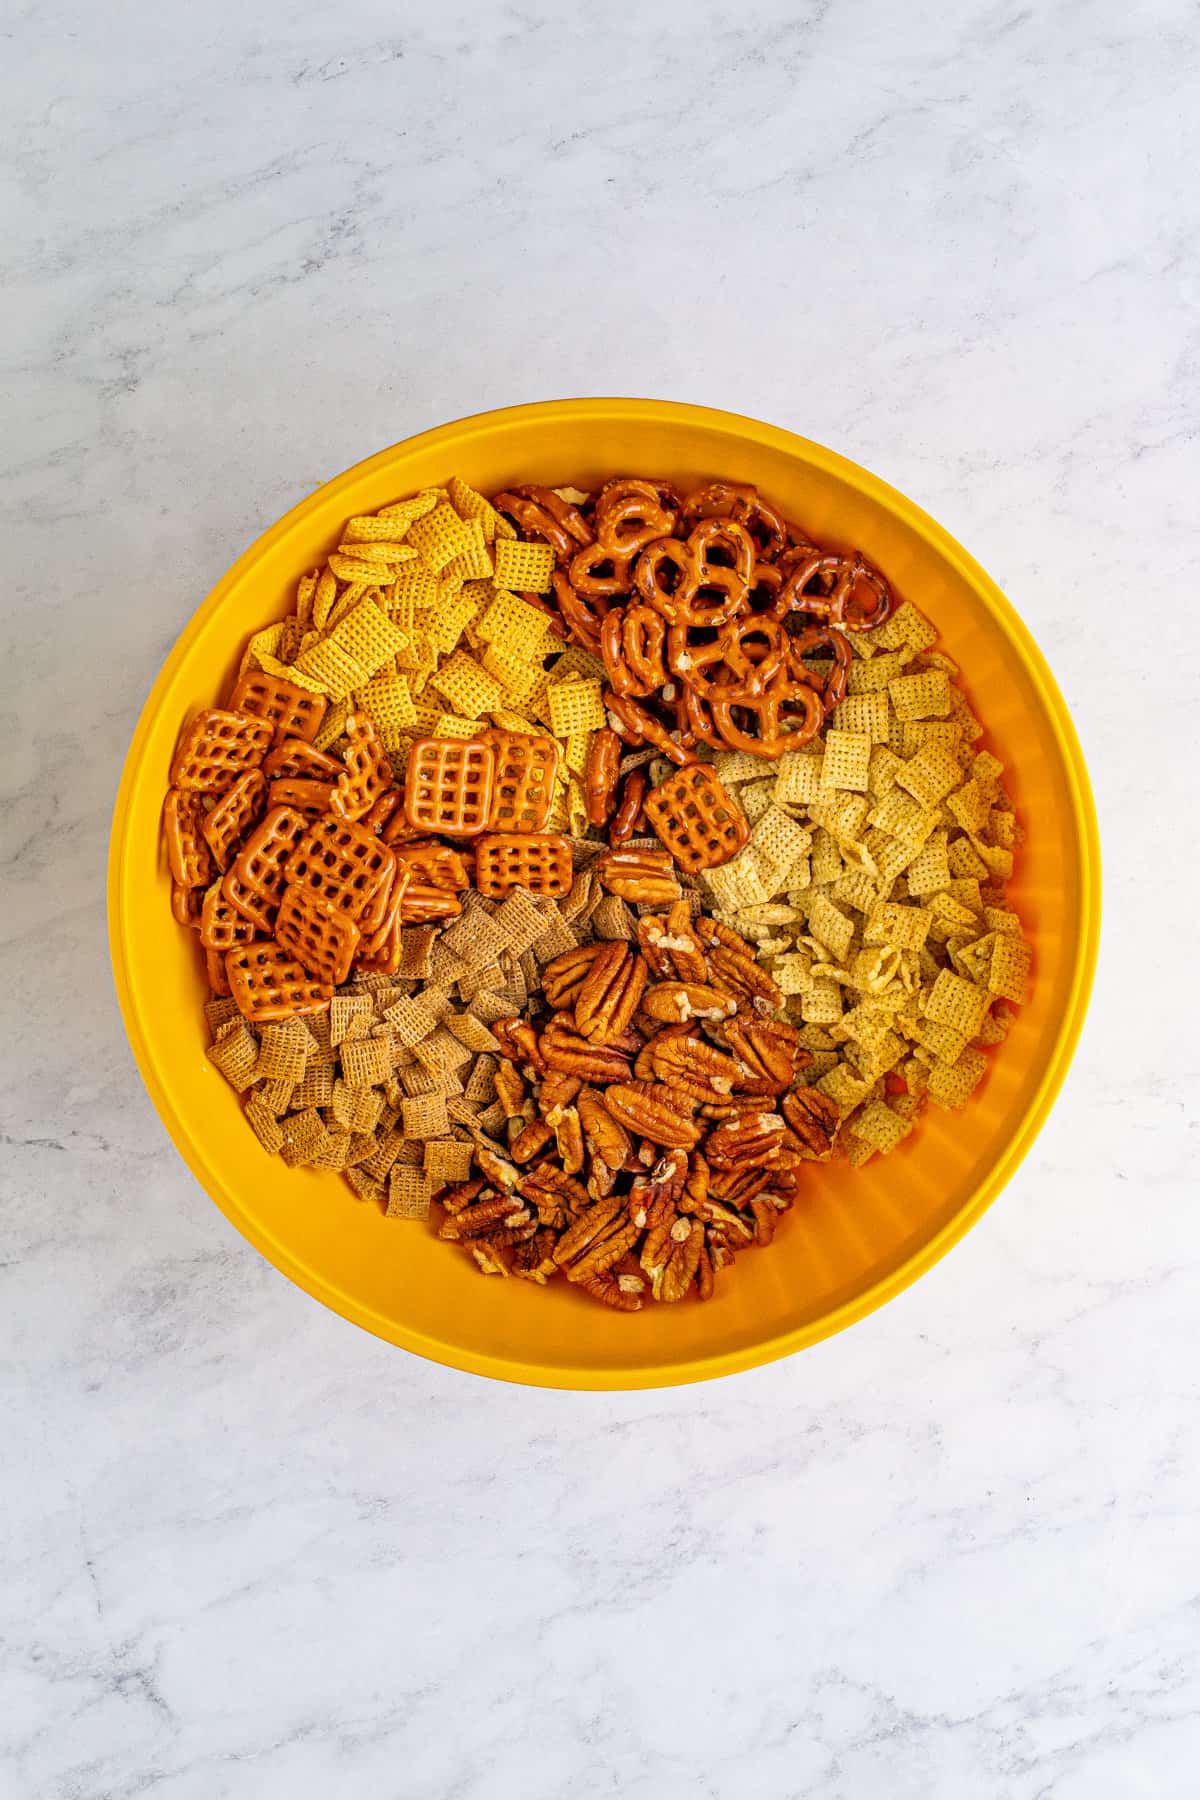 Chex cereal, pecans, and pretzels in a yellow bowl.